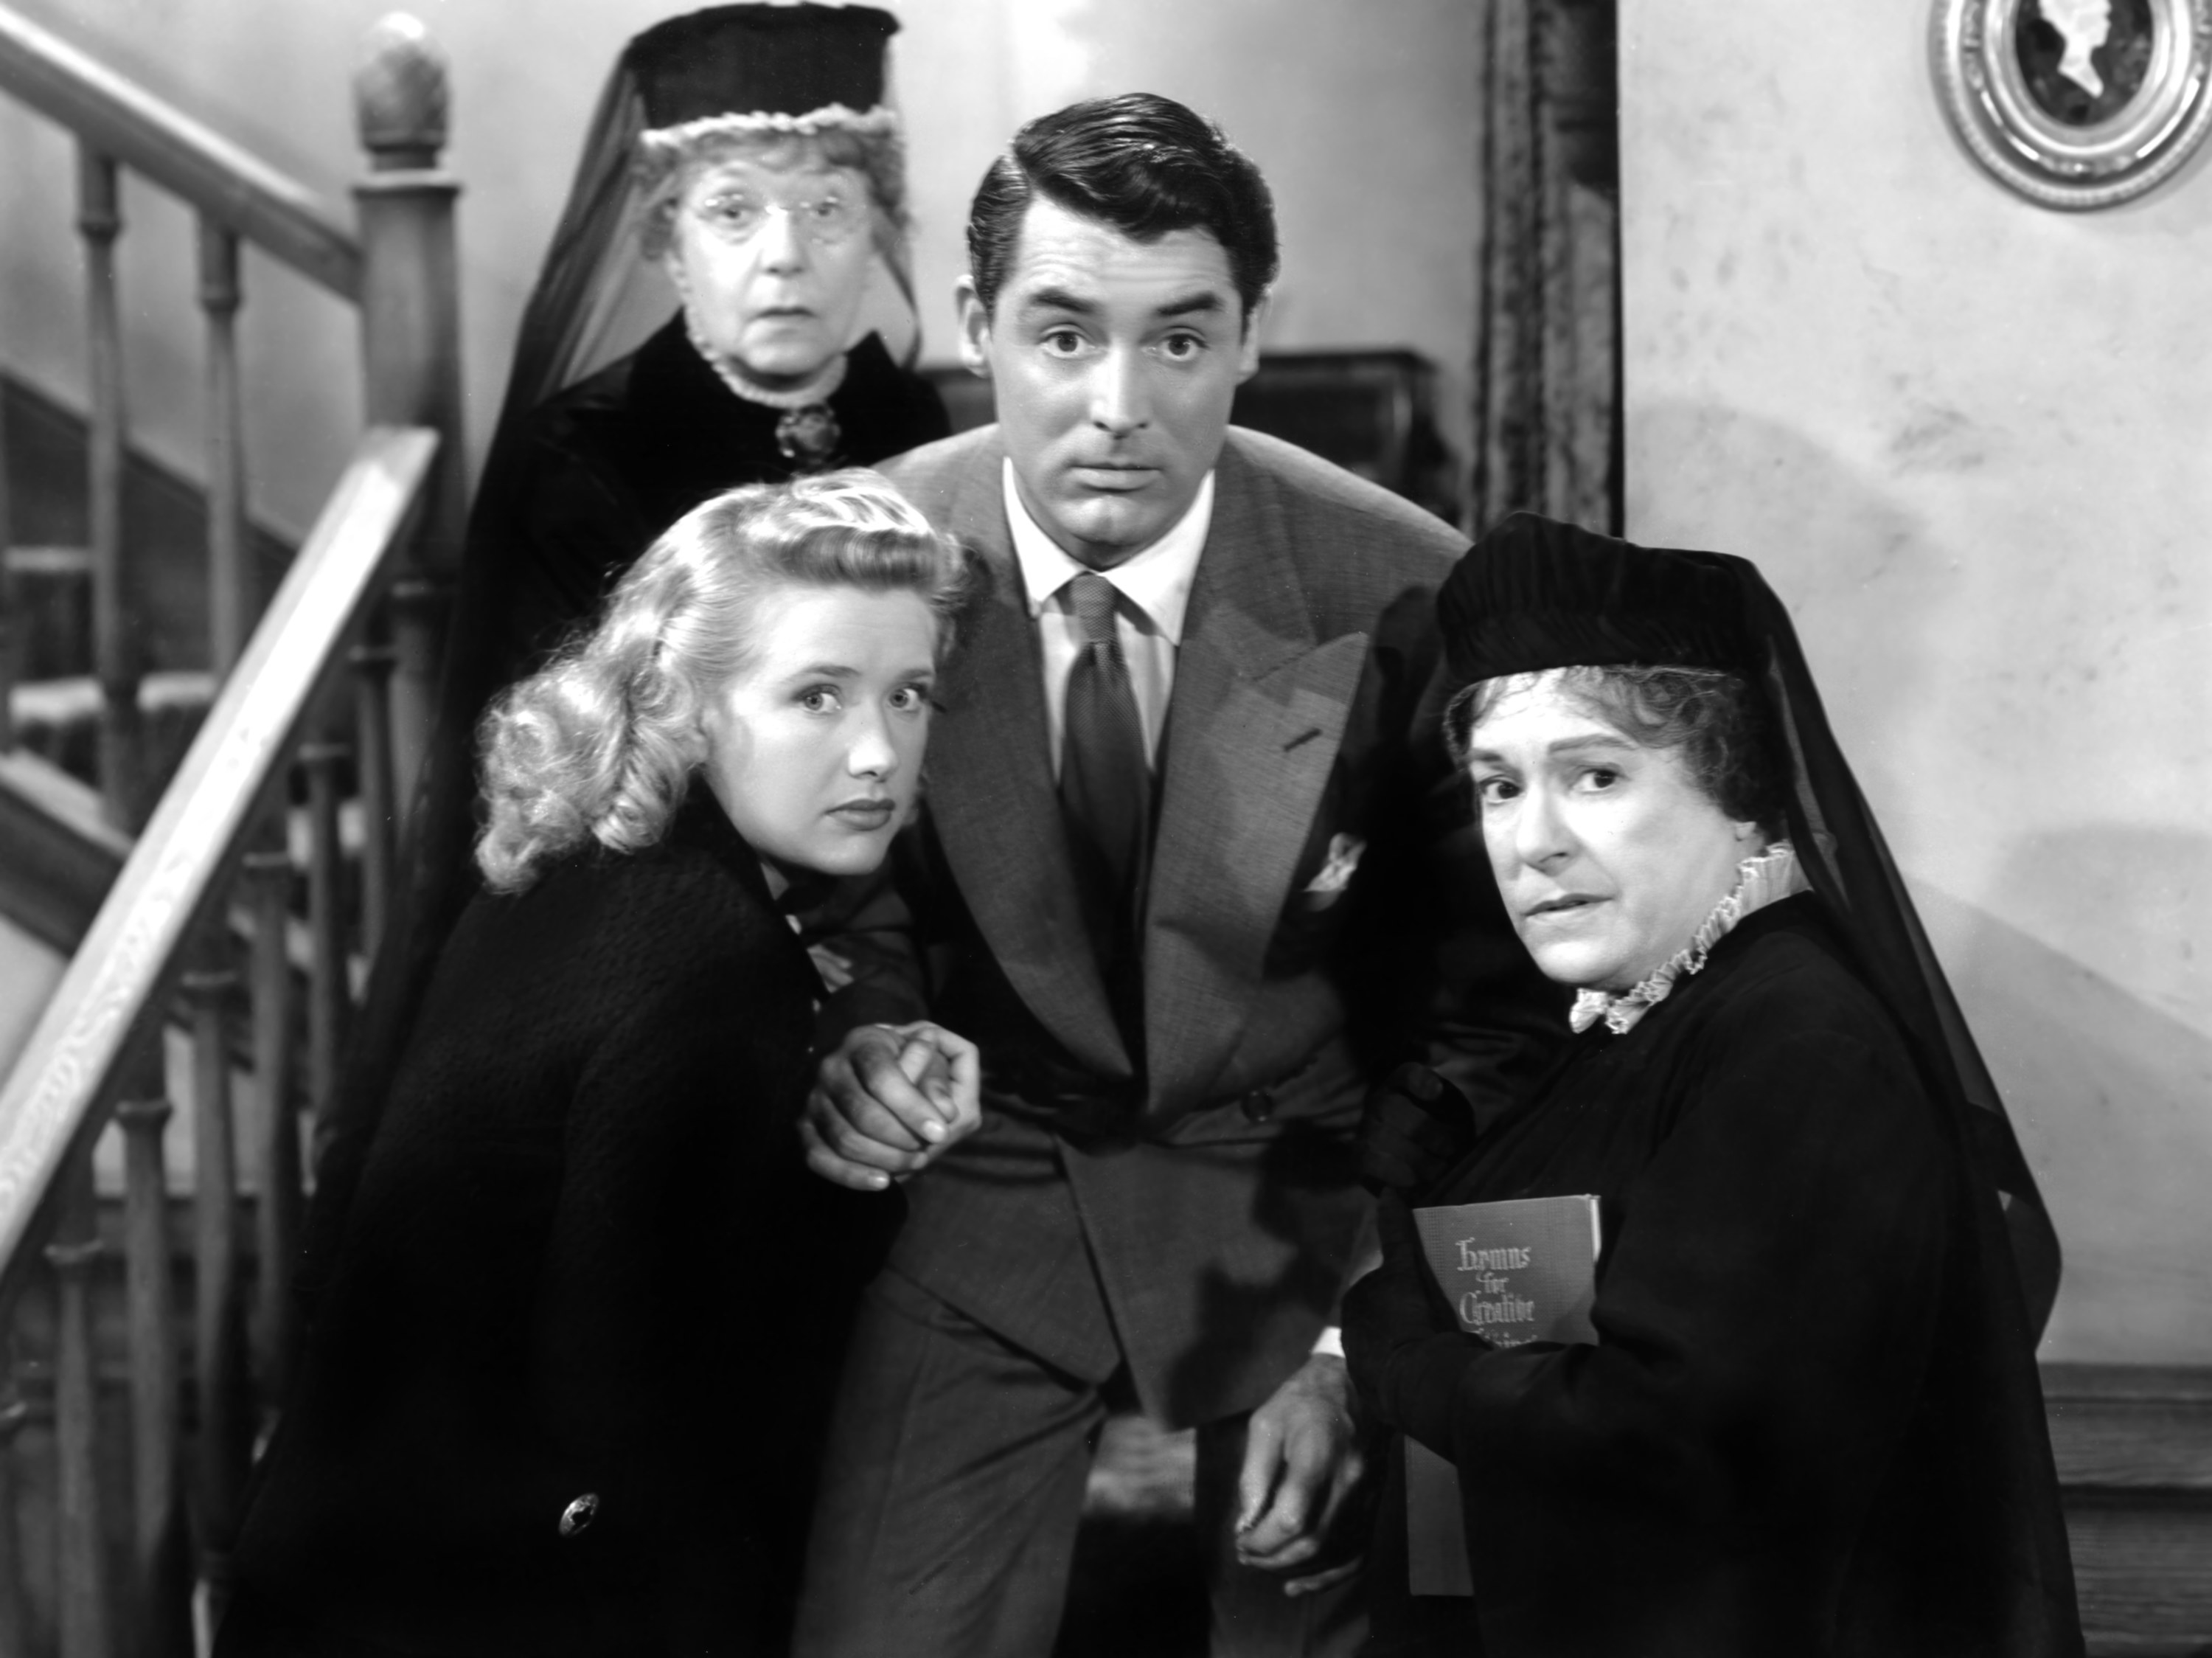 Carey Grant looks into the camera with Priscilla Lane, Jean Adair, and Josephine Hull surrounding him